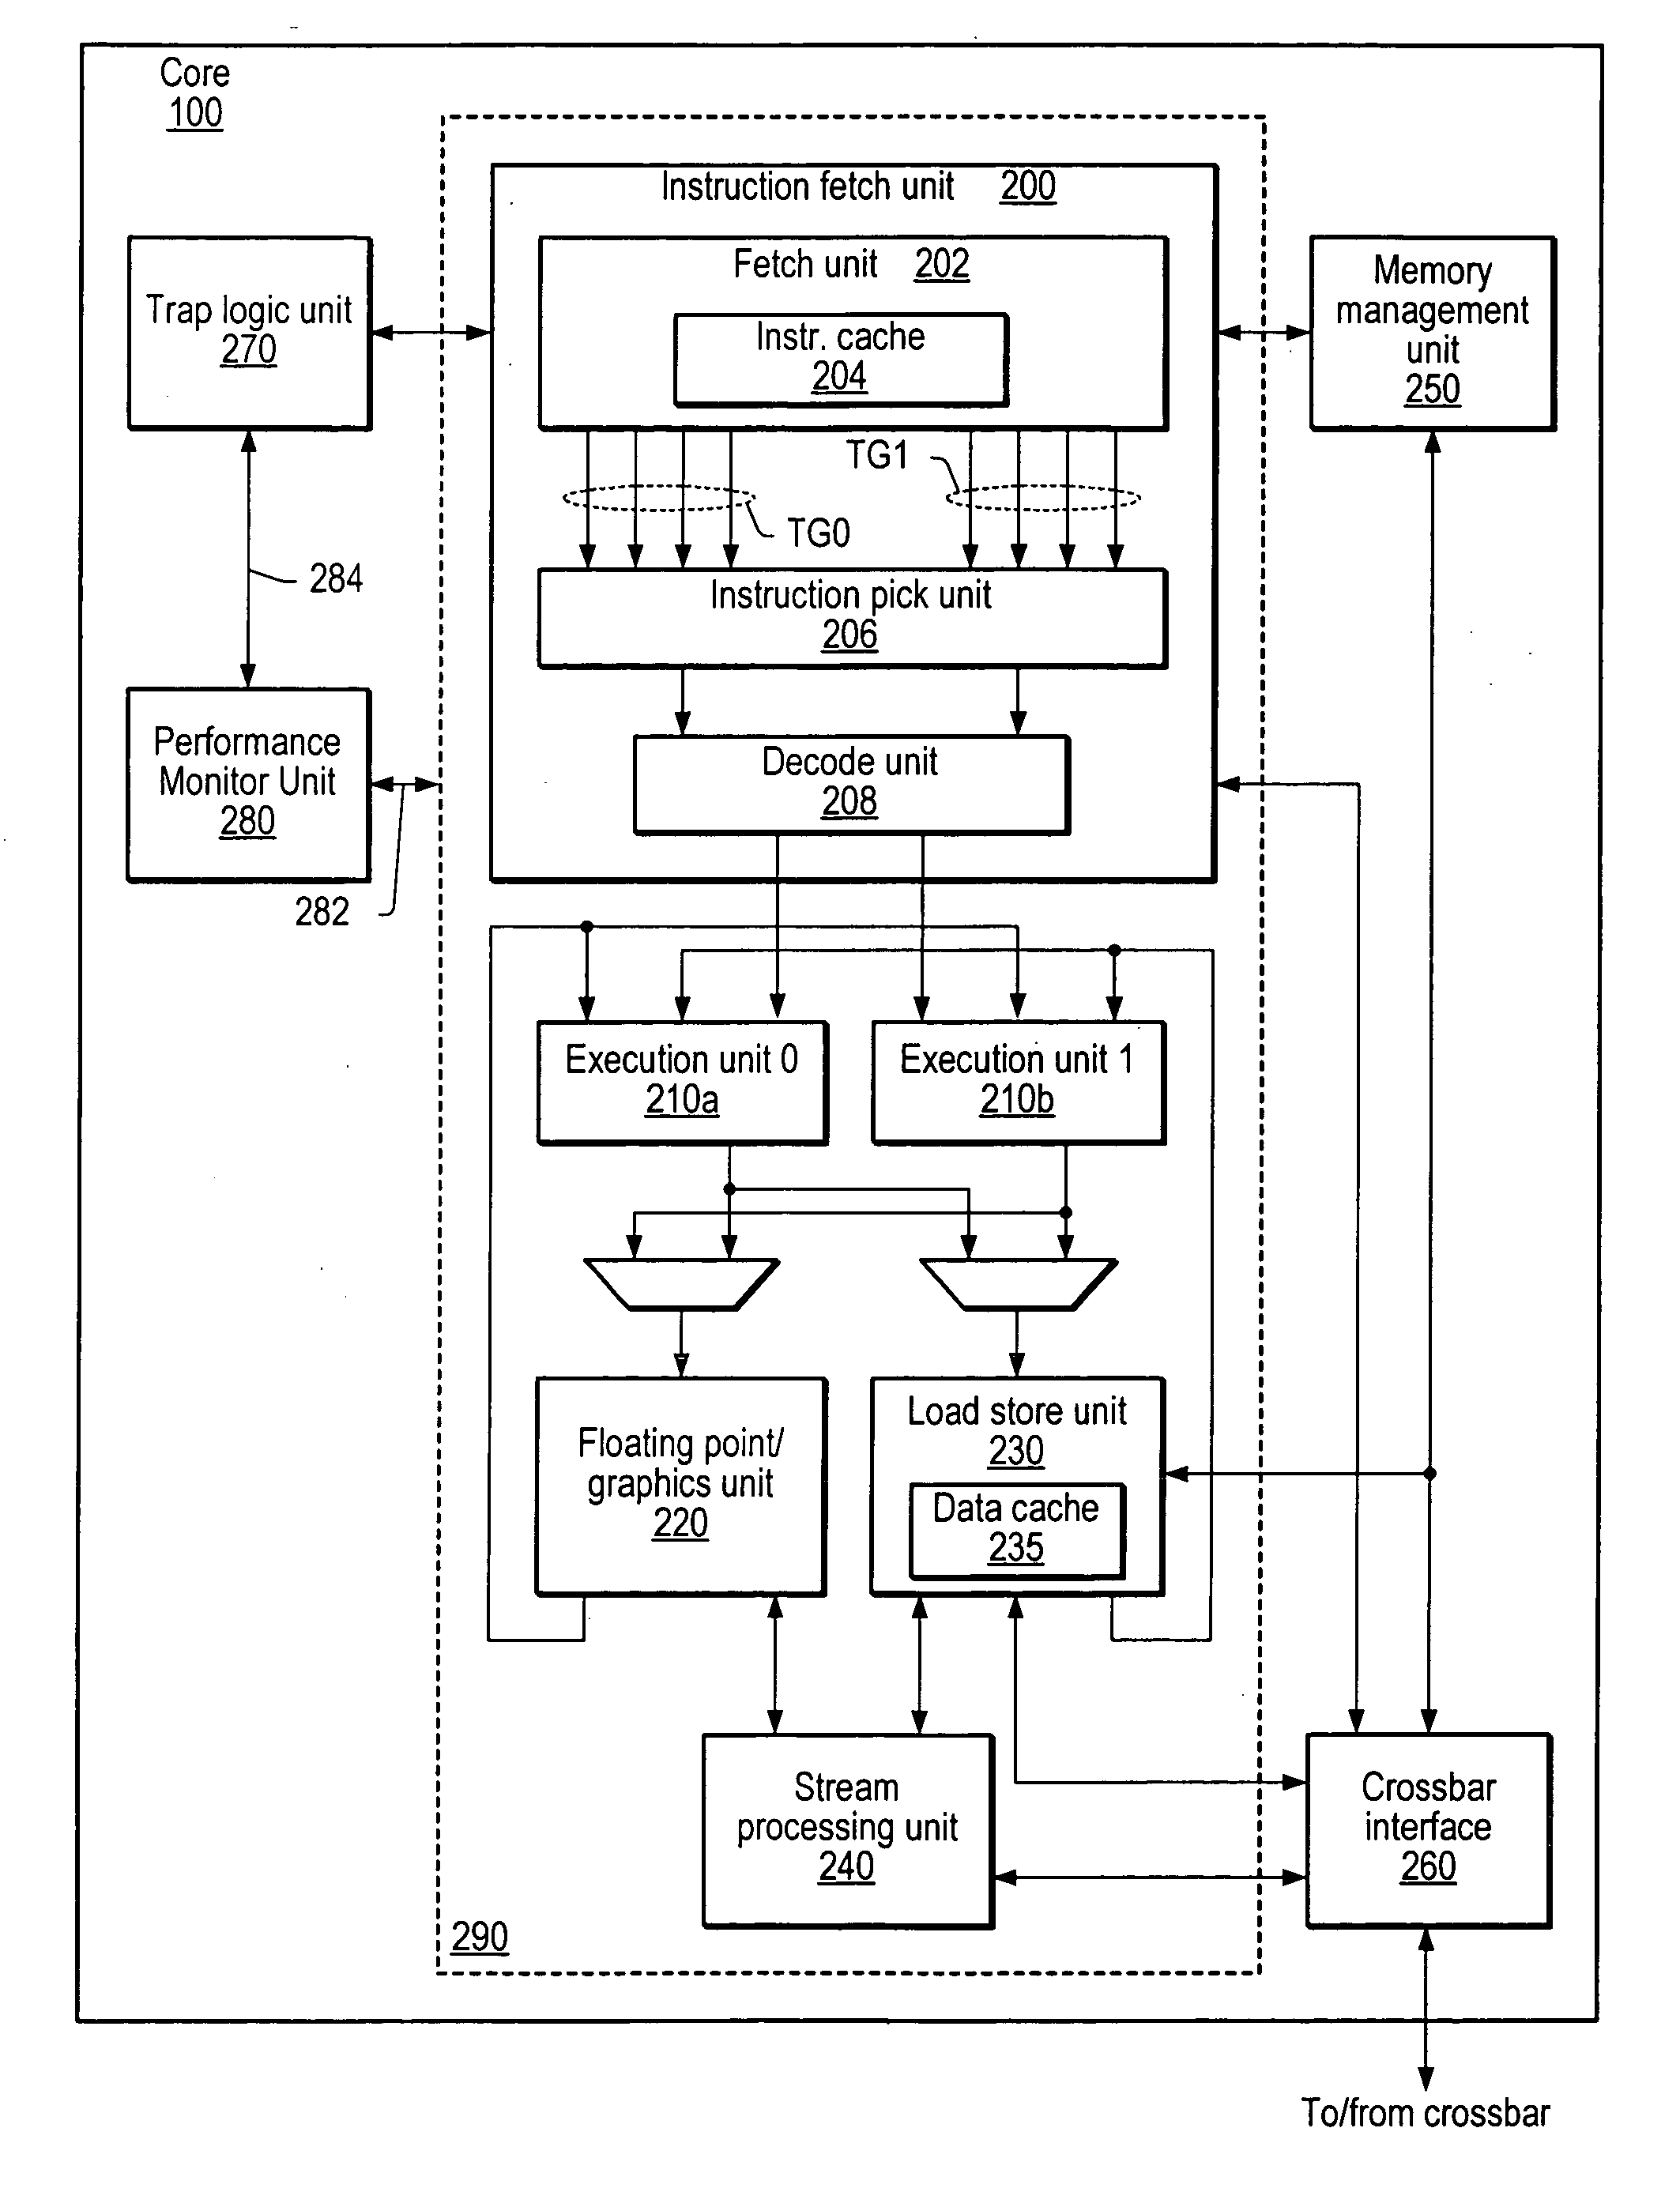 Method and apparatus for precisely identifying effective addresses associated with hardware events